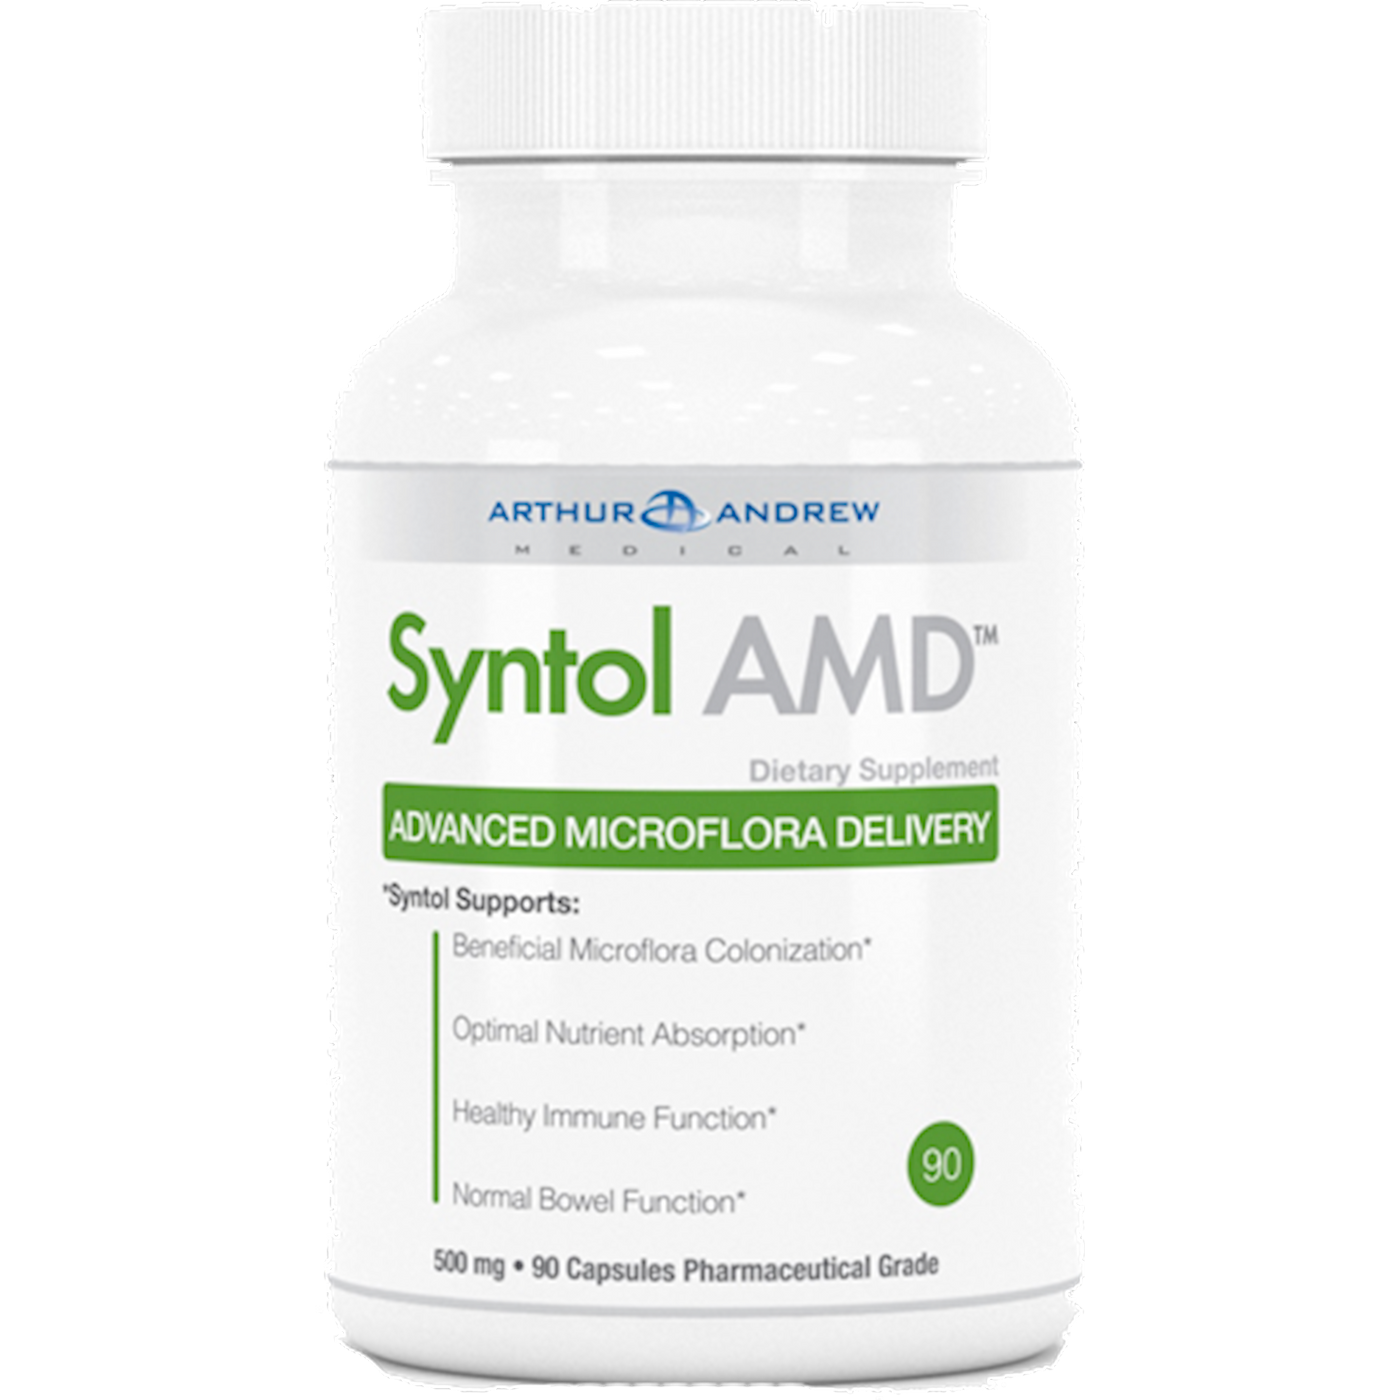 Syntol AMD  Curated Wellness